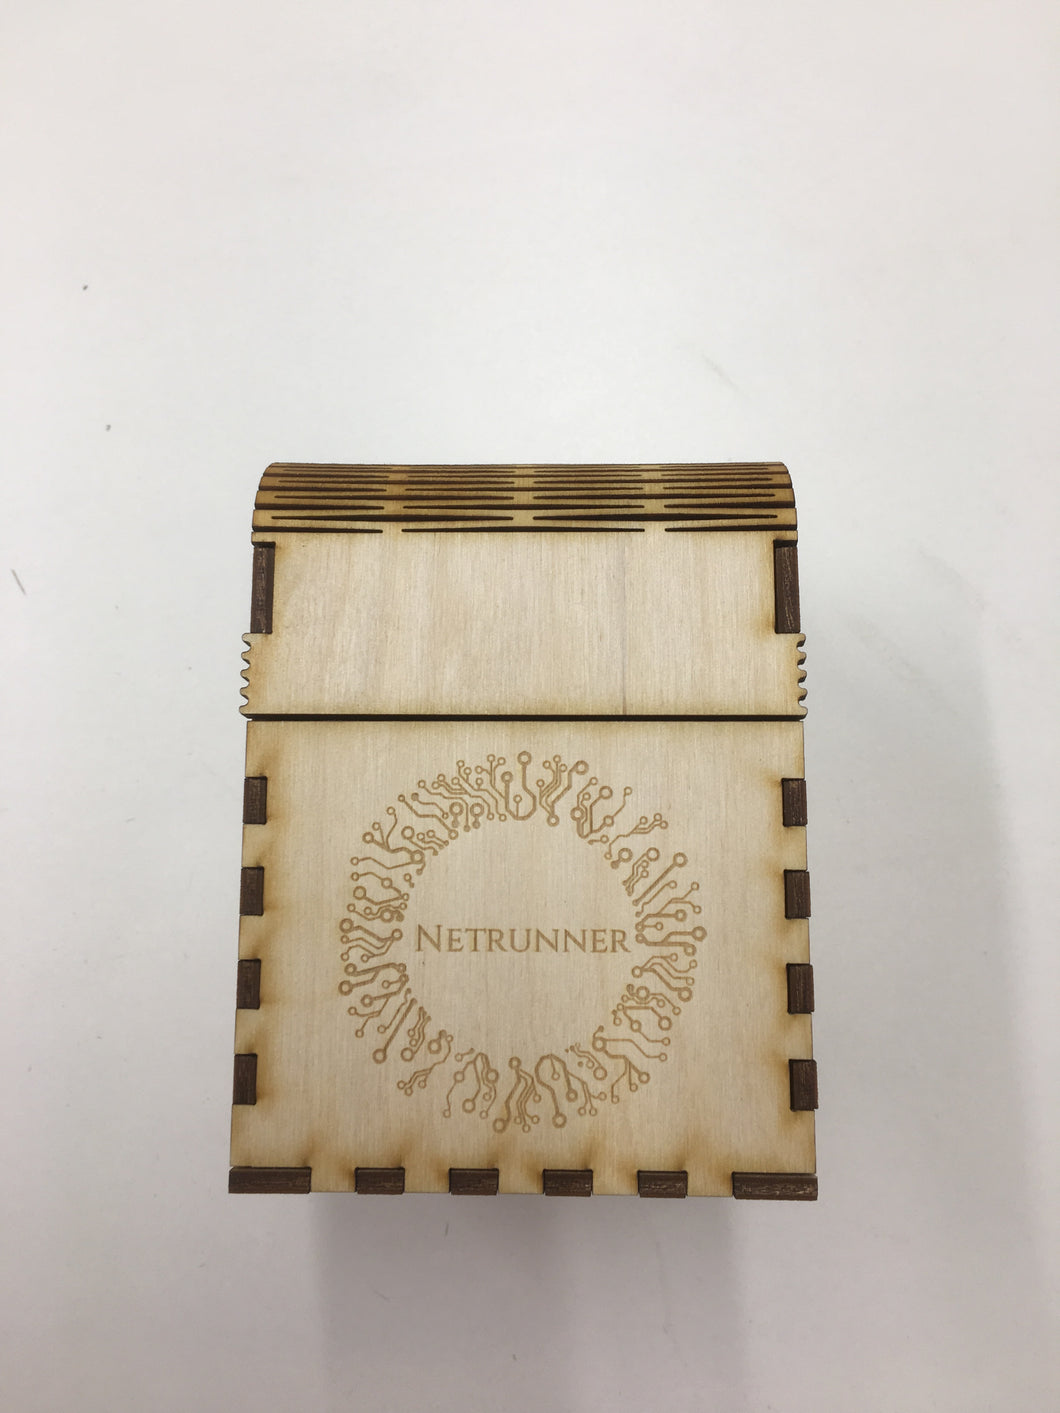 Wooden double card deck box with customised engraving